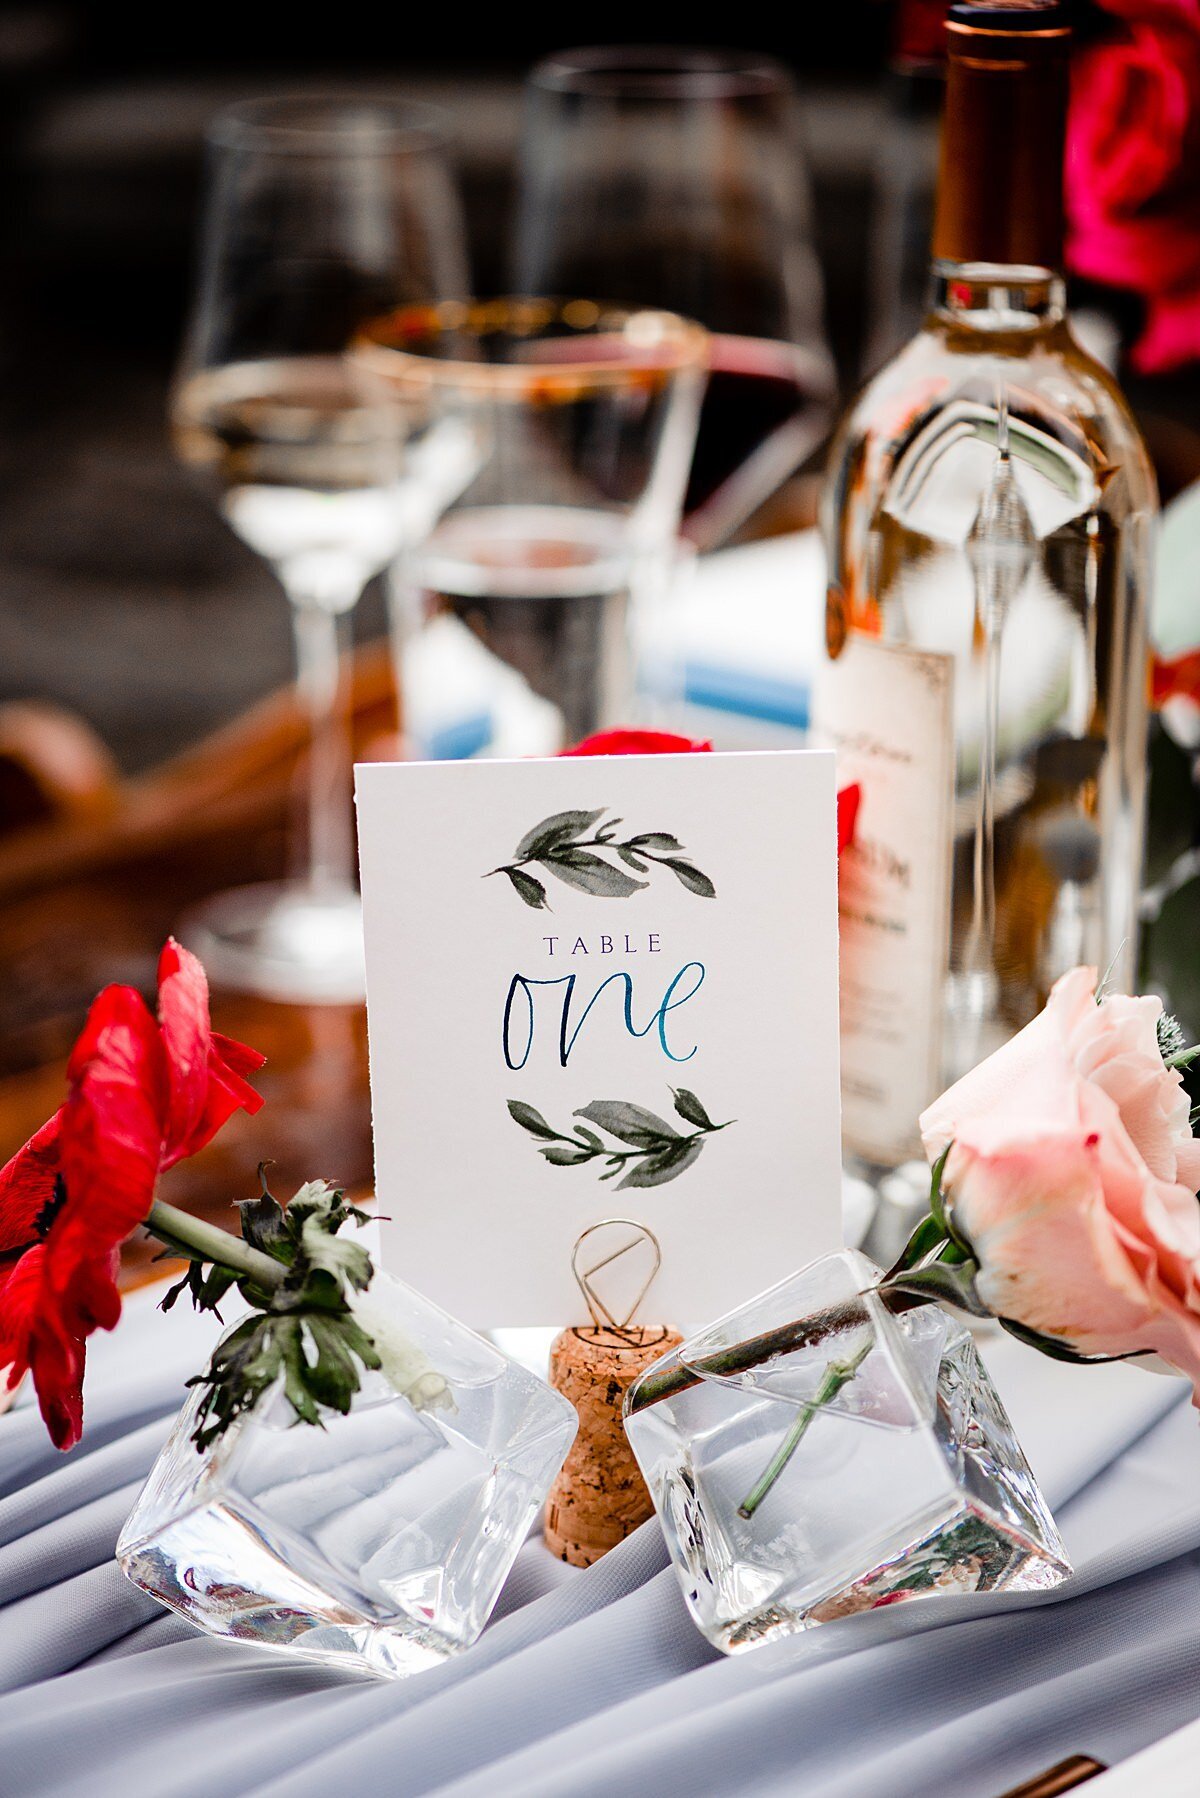 The hand drawn table number card with gray watercolor leaf vines and a teal hand calligraphy ONE is sitting in a wine cork stand between two ice cube glass bud vases with a red rose and a blush rose sitting on top of a dove gray organza tale runner with a bottle of Arrington Vineyards white wine and two wine glasses in the background.